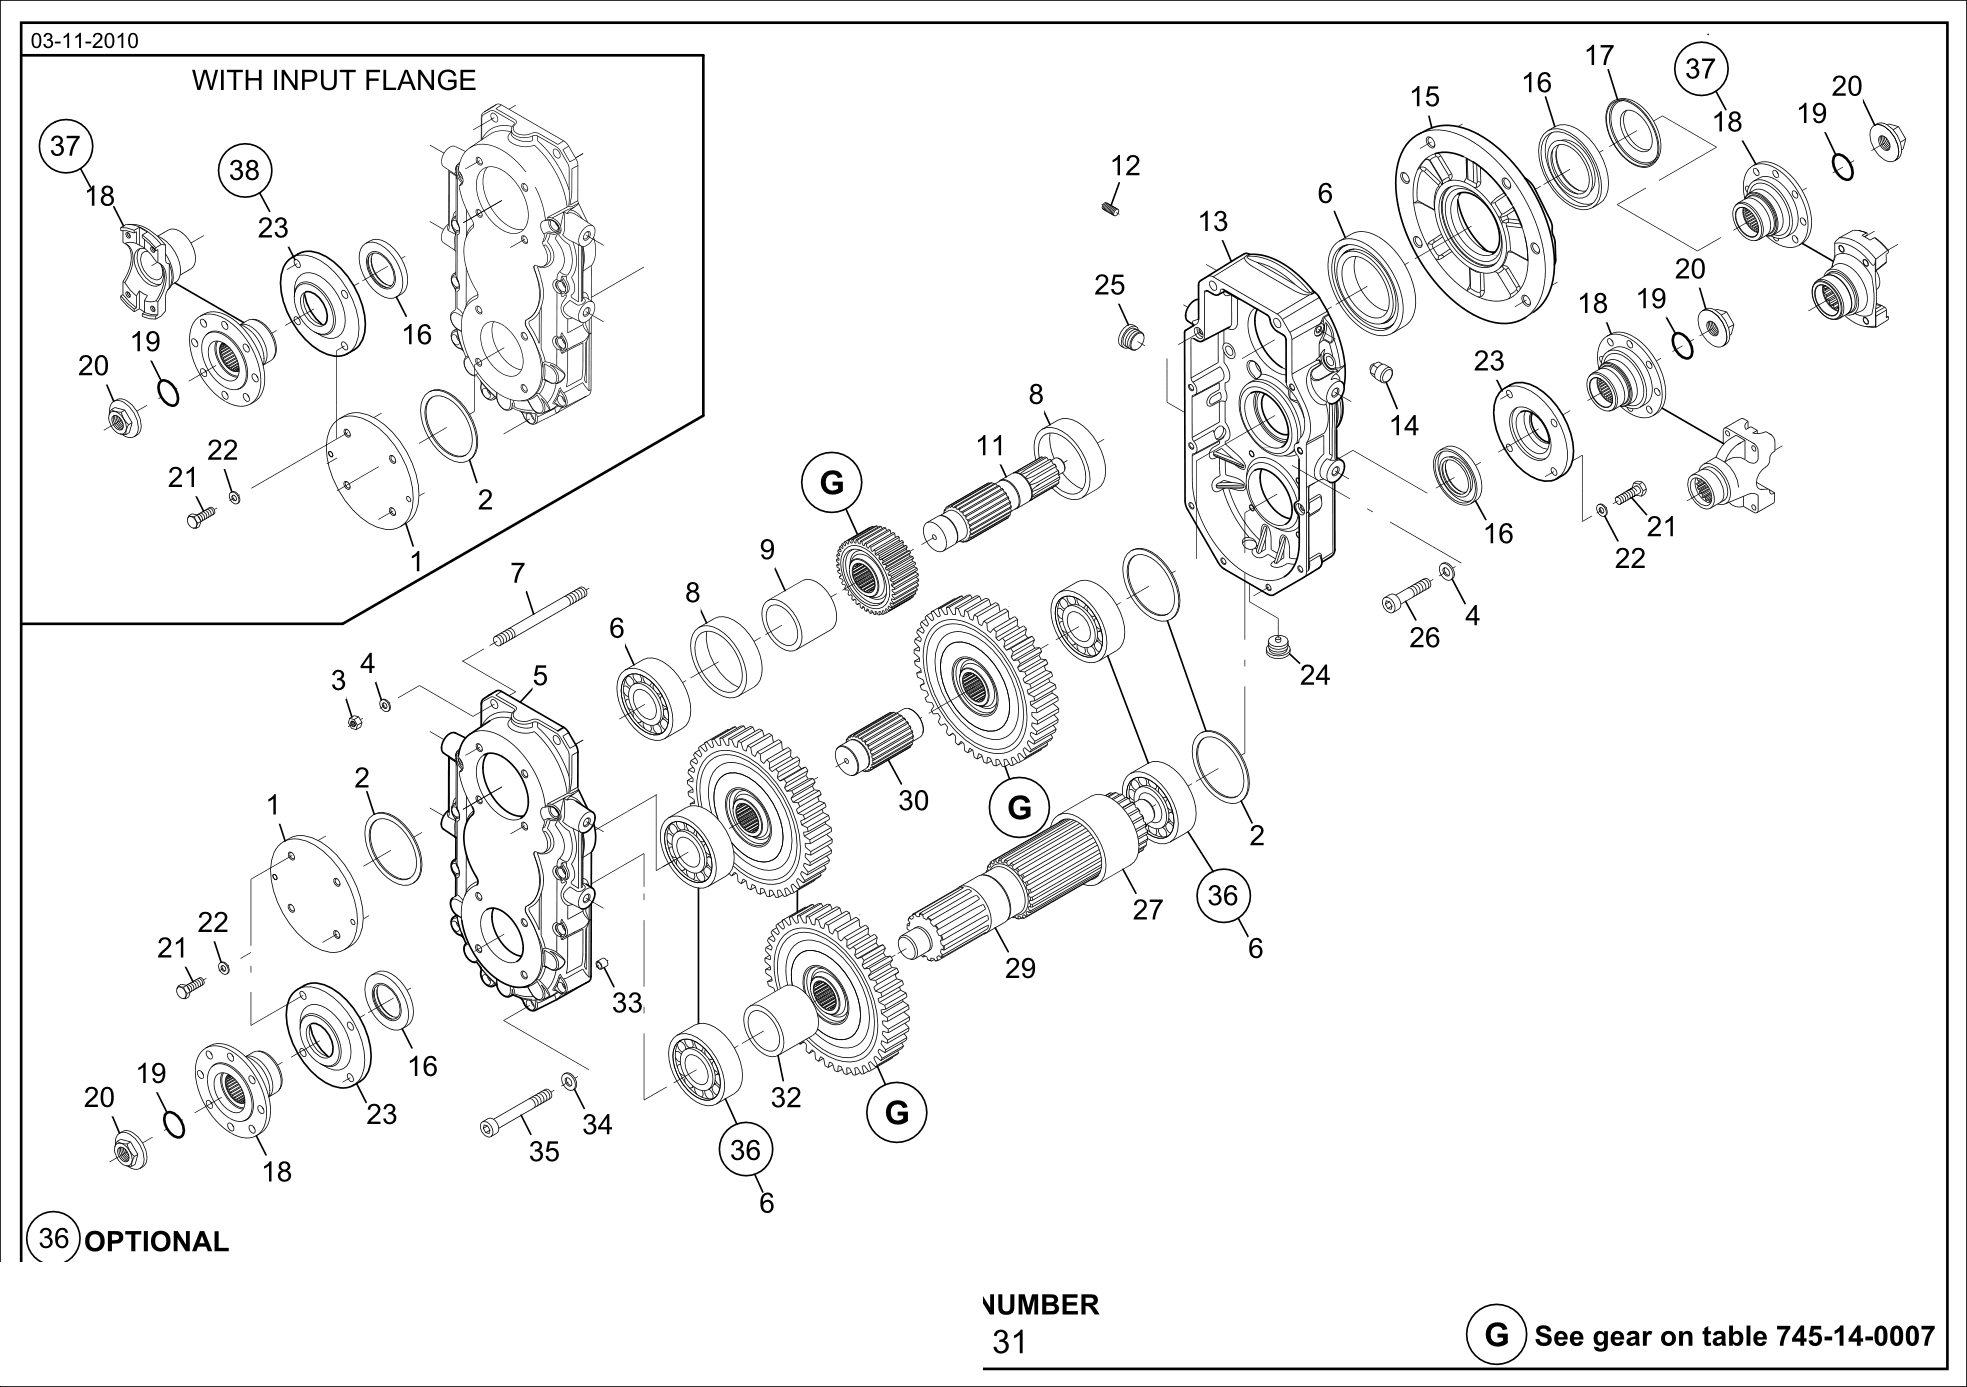 drawing for HSM HOHENLOHER 1398 - VENT